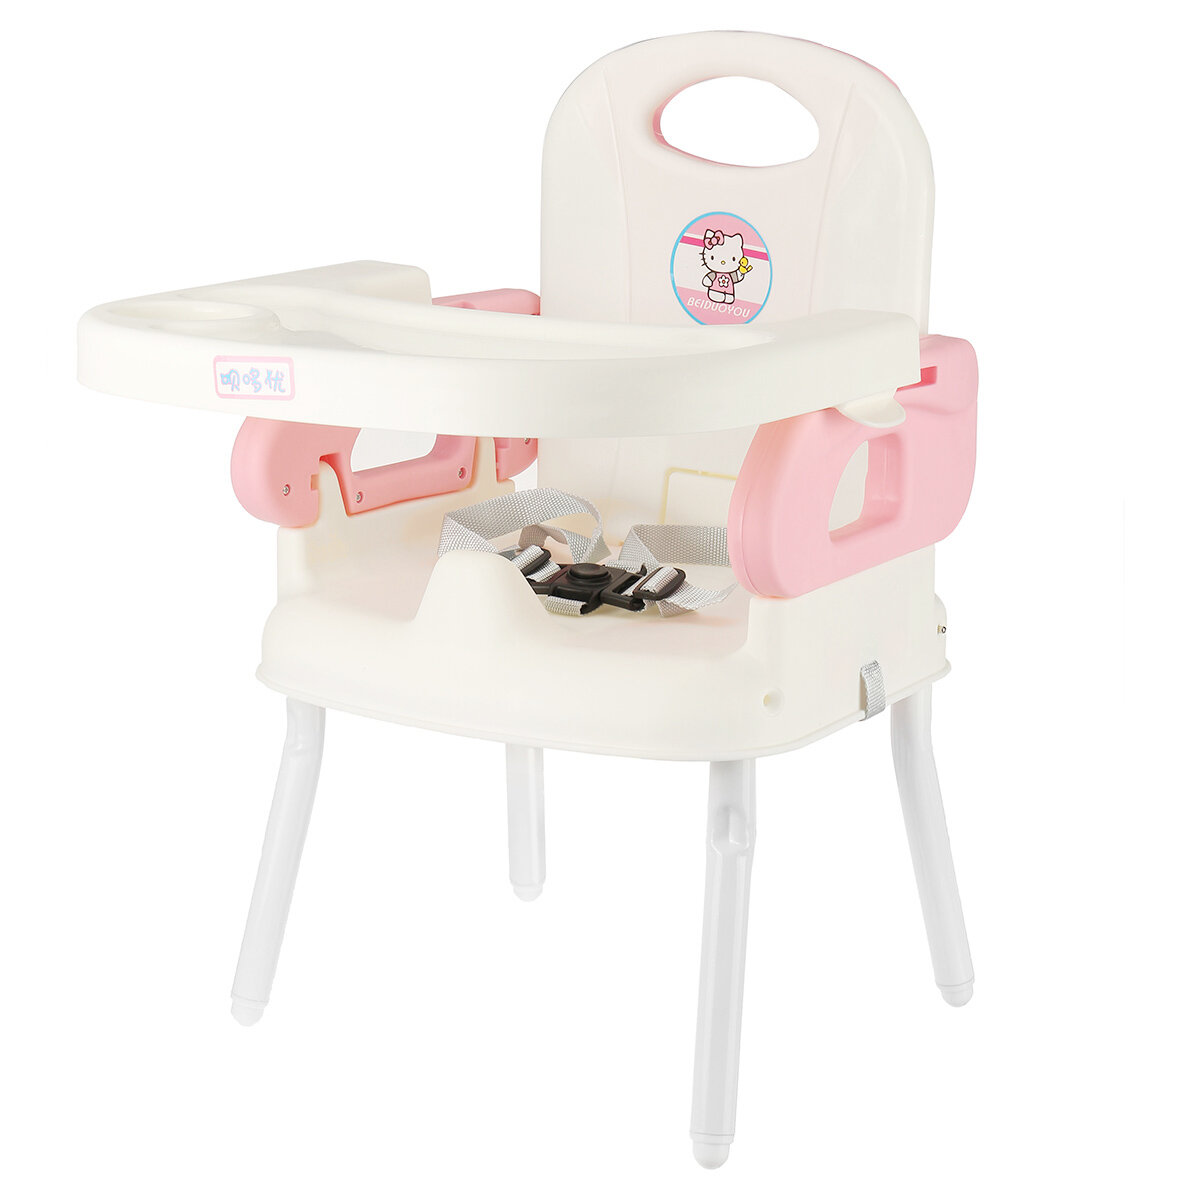 Folding Baby Dining Chair Child Feeding Seat Eating Toddler Booster High Chair